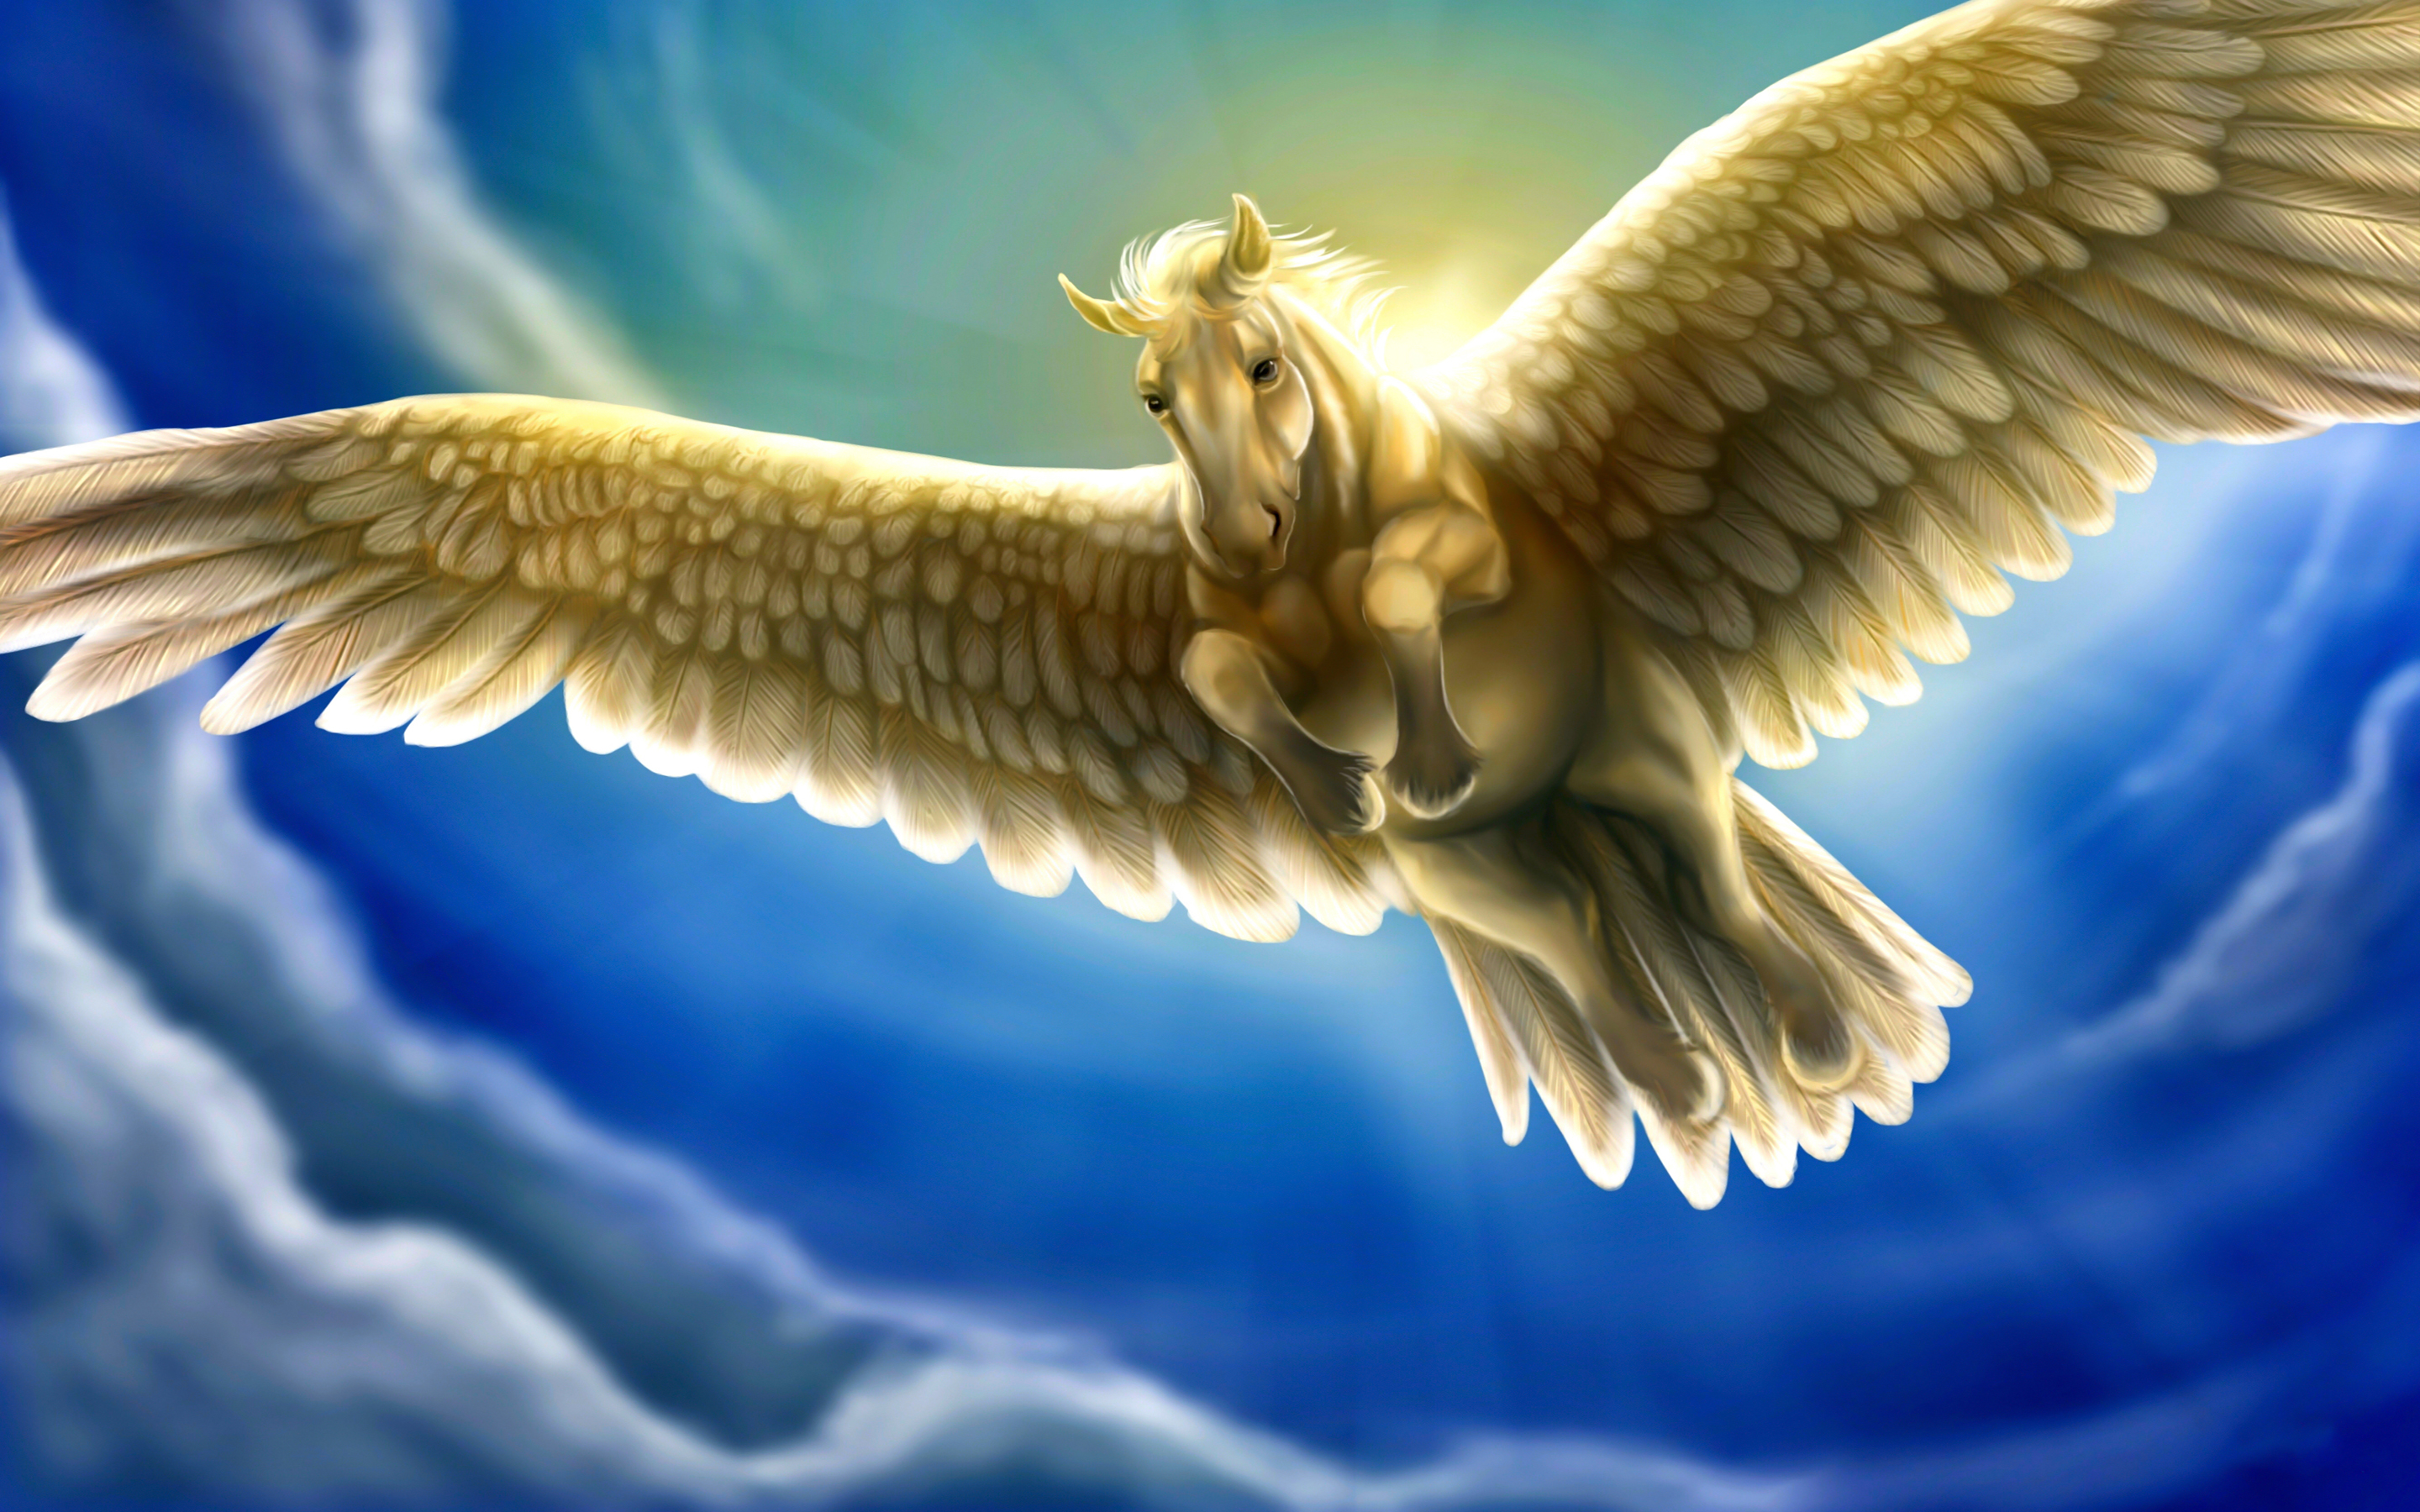 Heavenly White Horse With Wings Pegasus Fantasy Sky Blue Hd Wallpapers